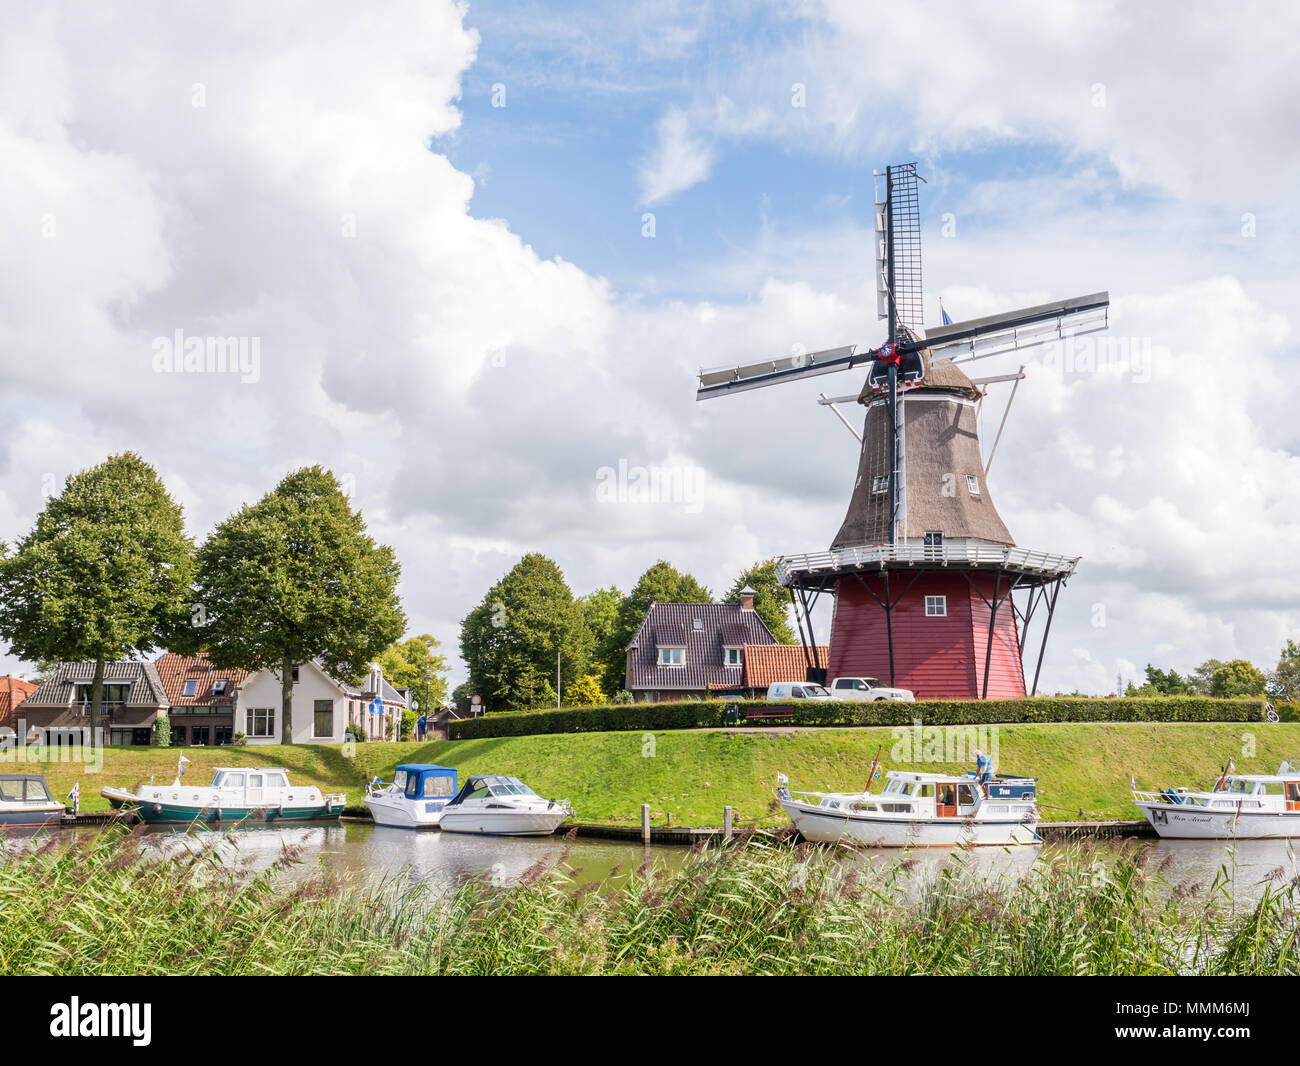 Motorboats on canal and windmill on fortifications of historic fortified town of Dokkum, Friesland, Netherlands Stock Photo